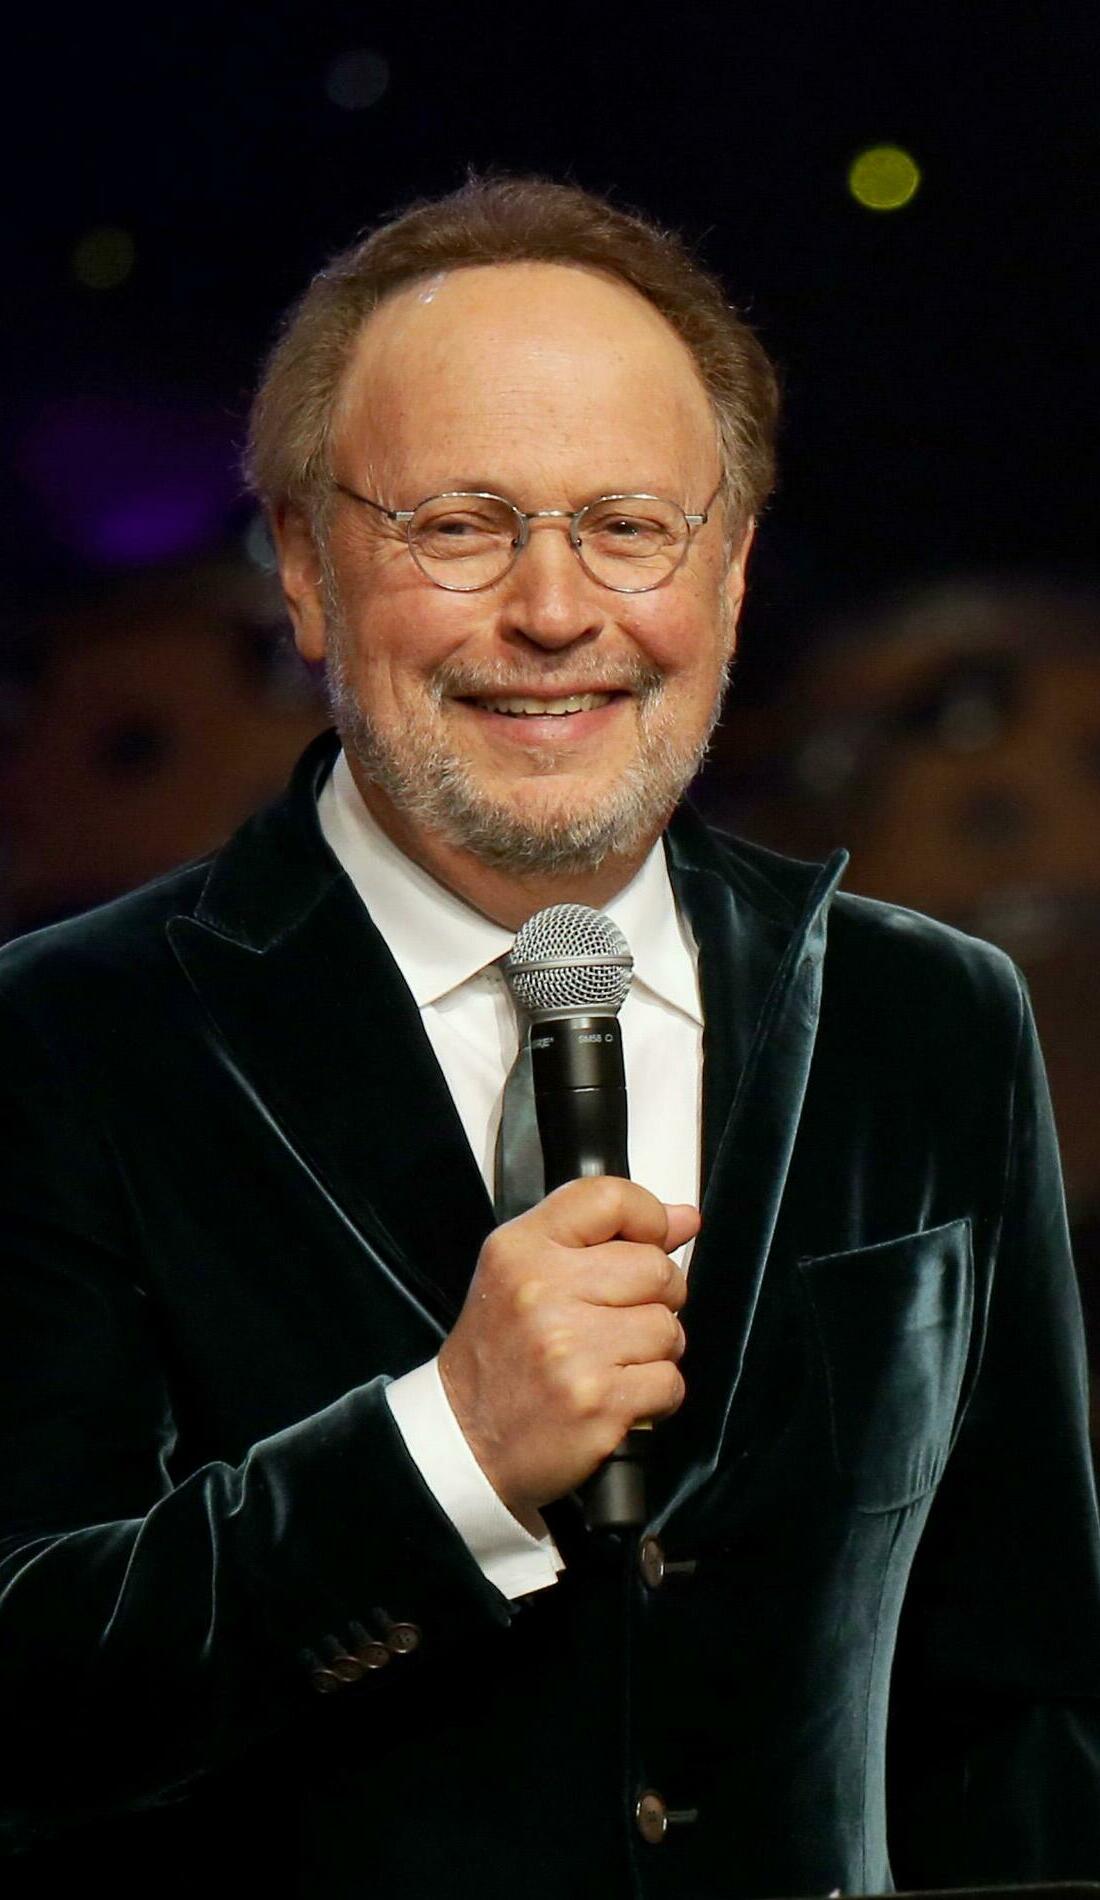 A Billy Crystal live event